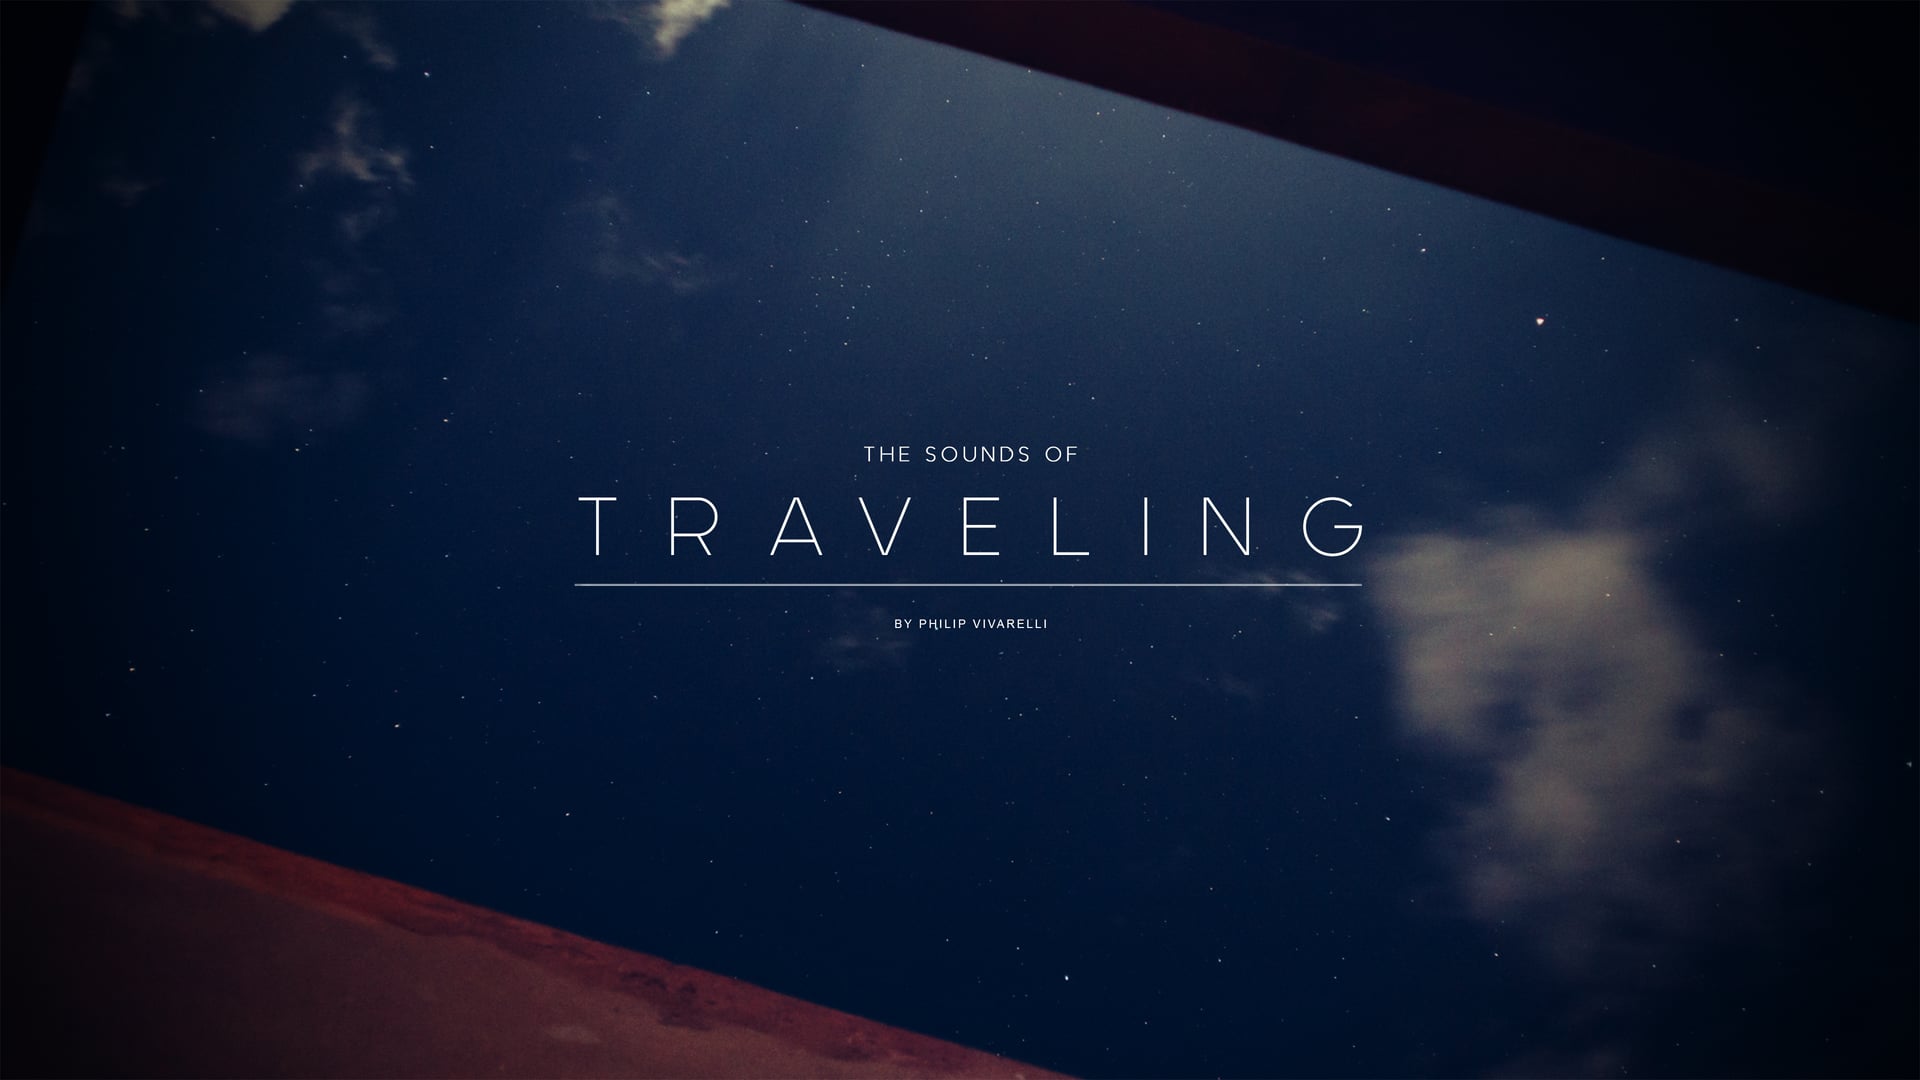 THE SOUNDS OF TRAVELING